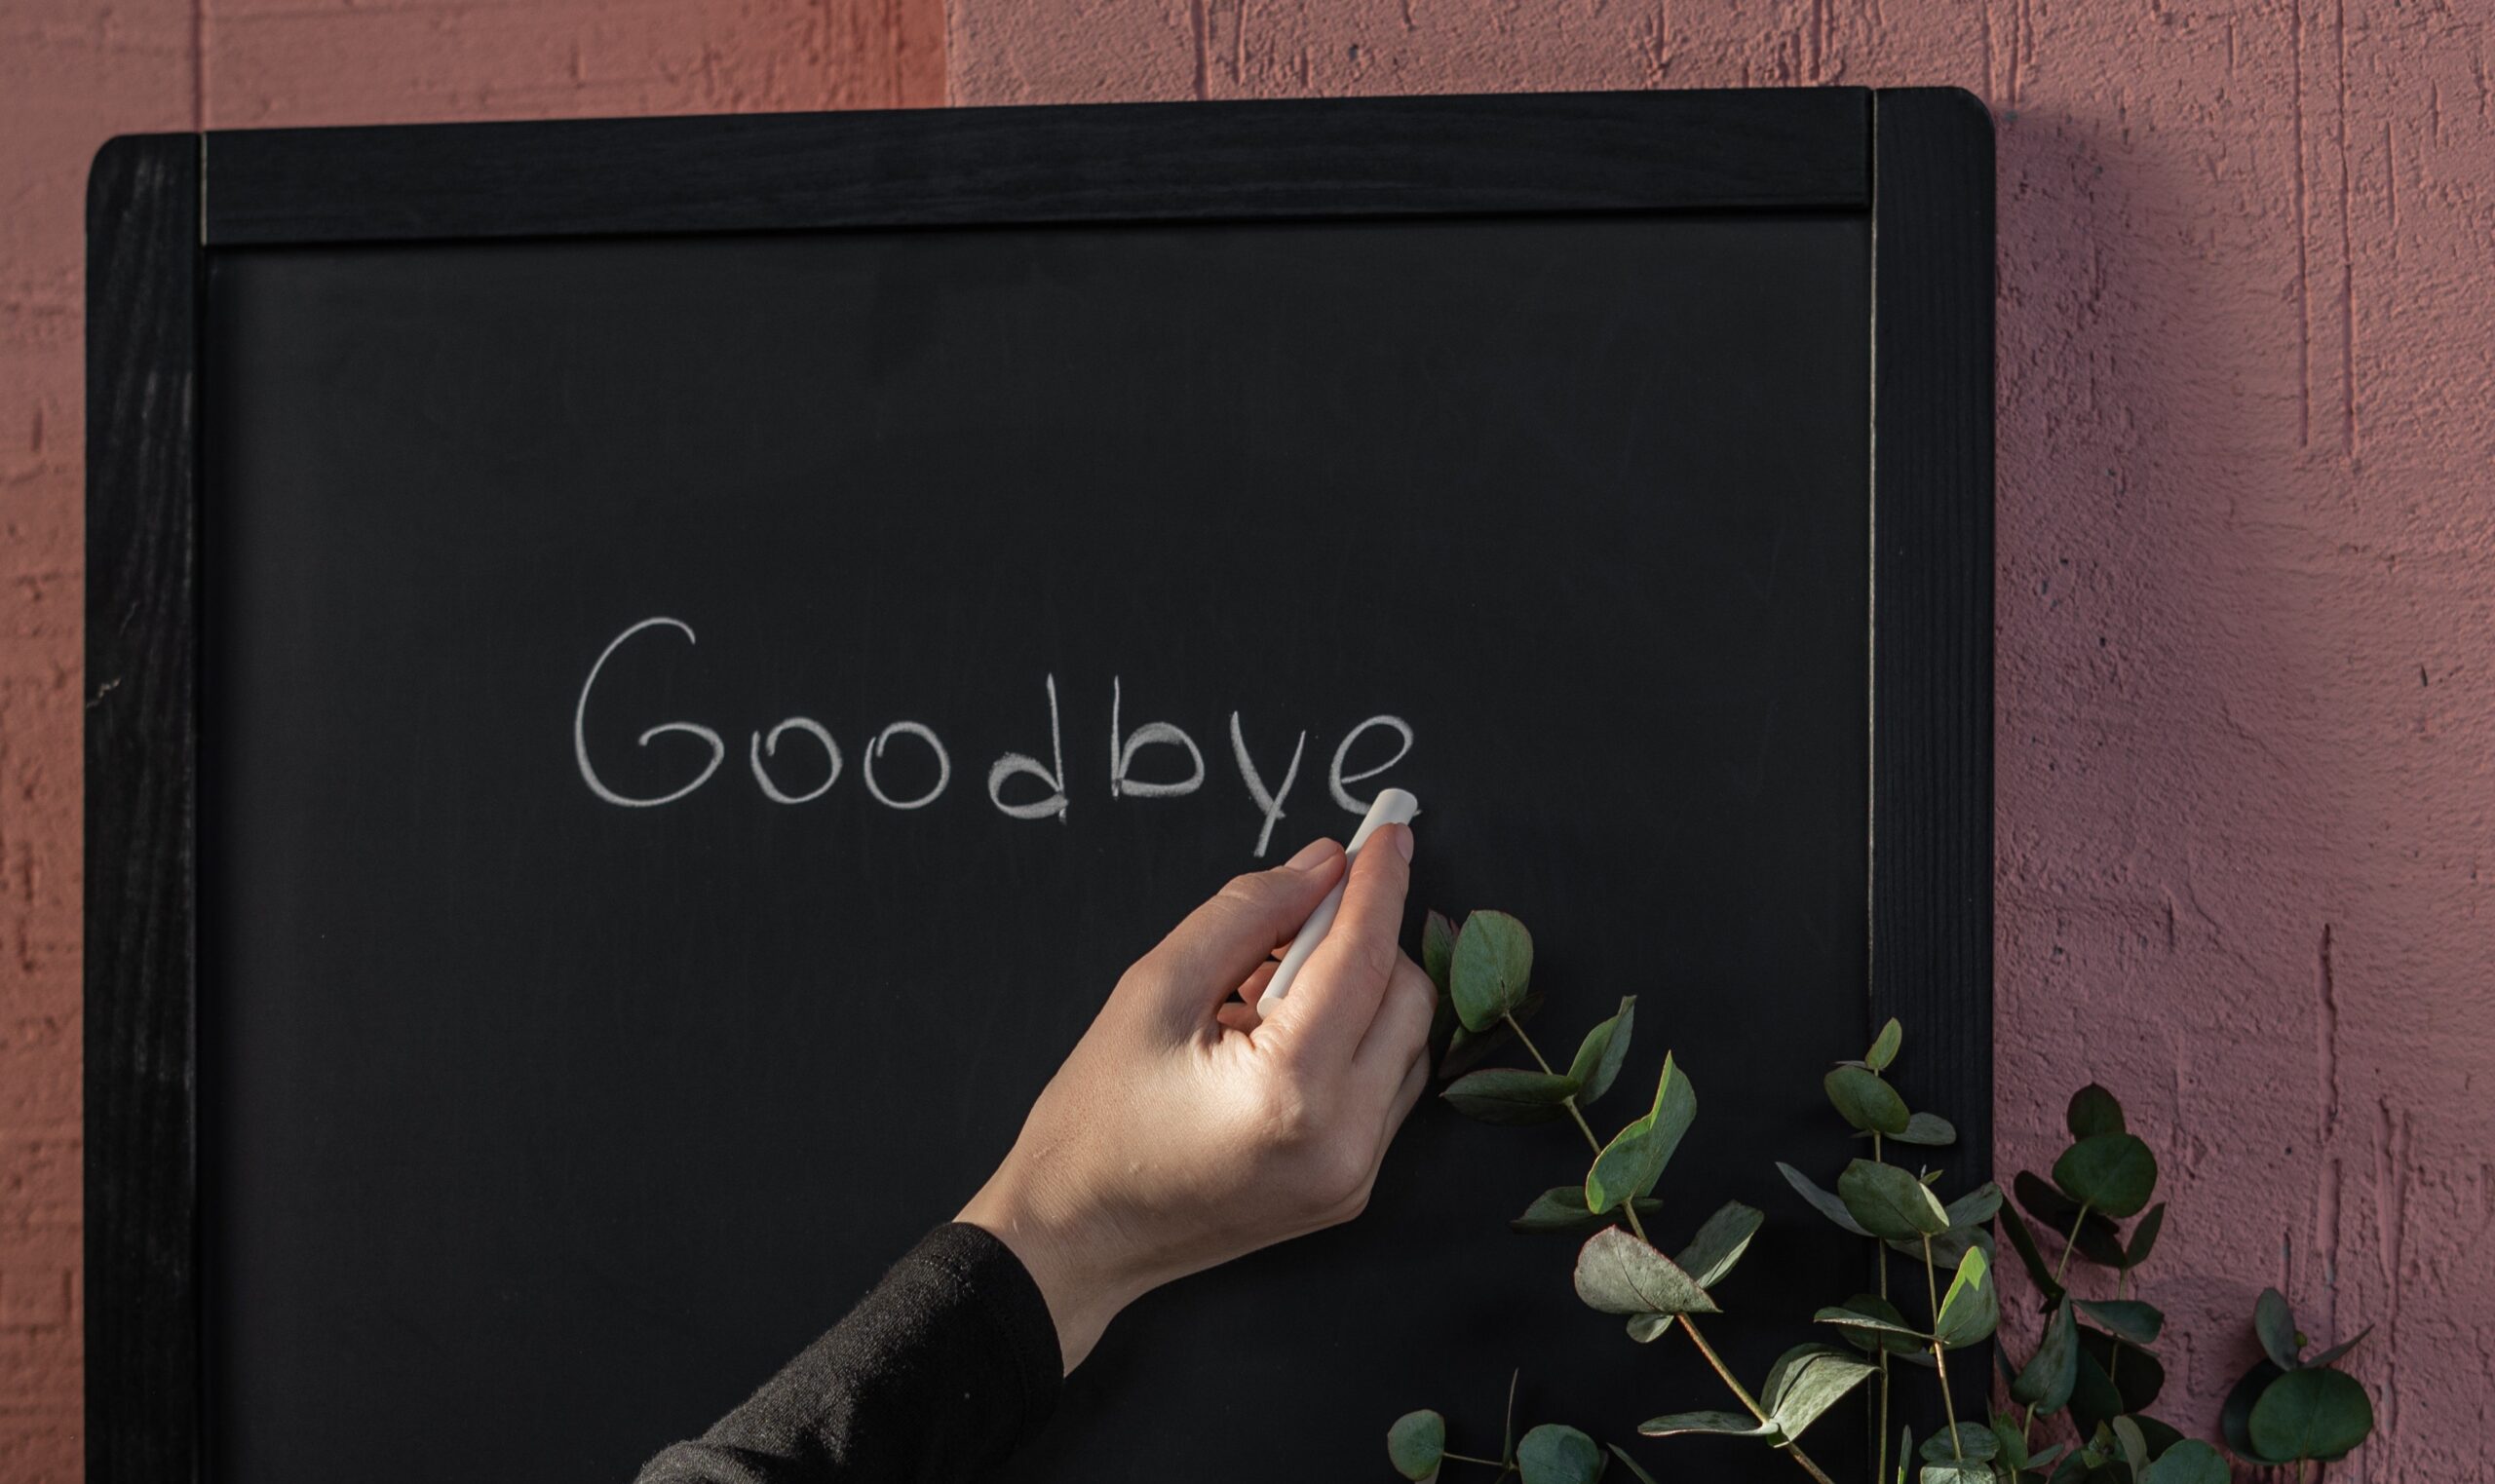 tune up your unsubscribe process - goodbye on a chalkboard